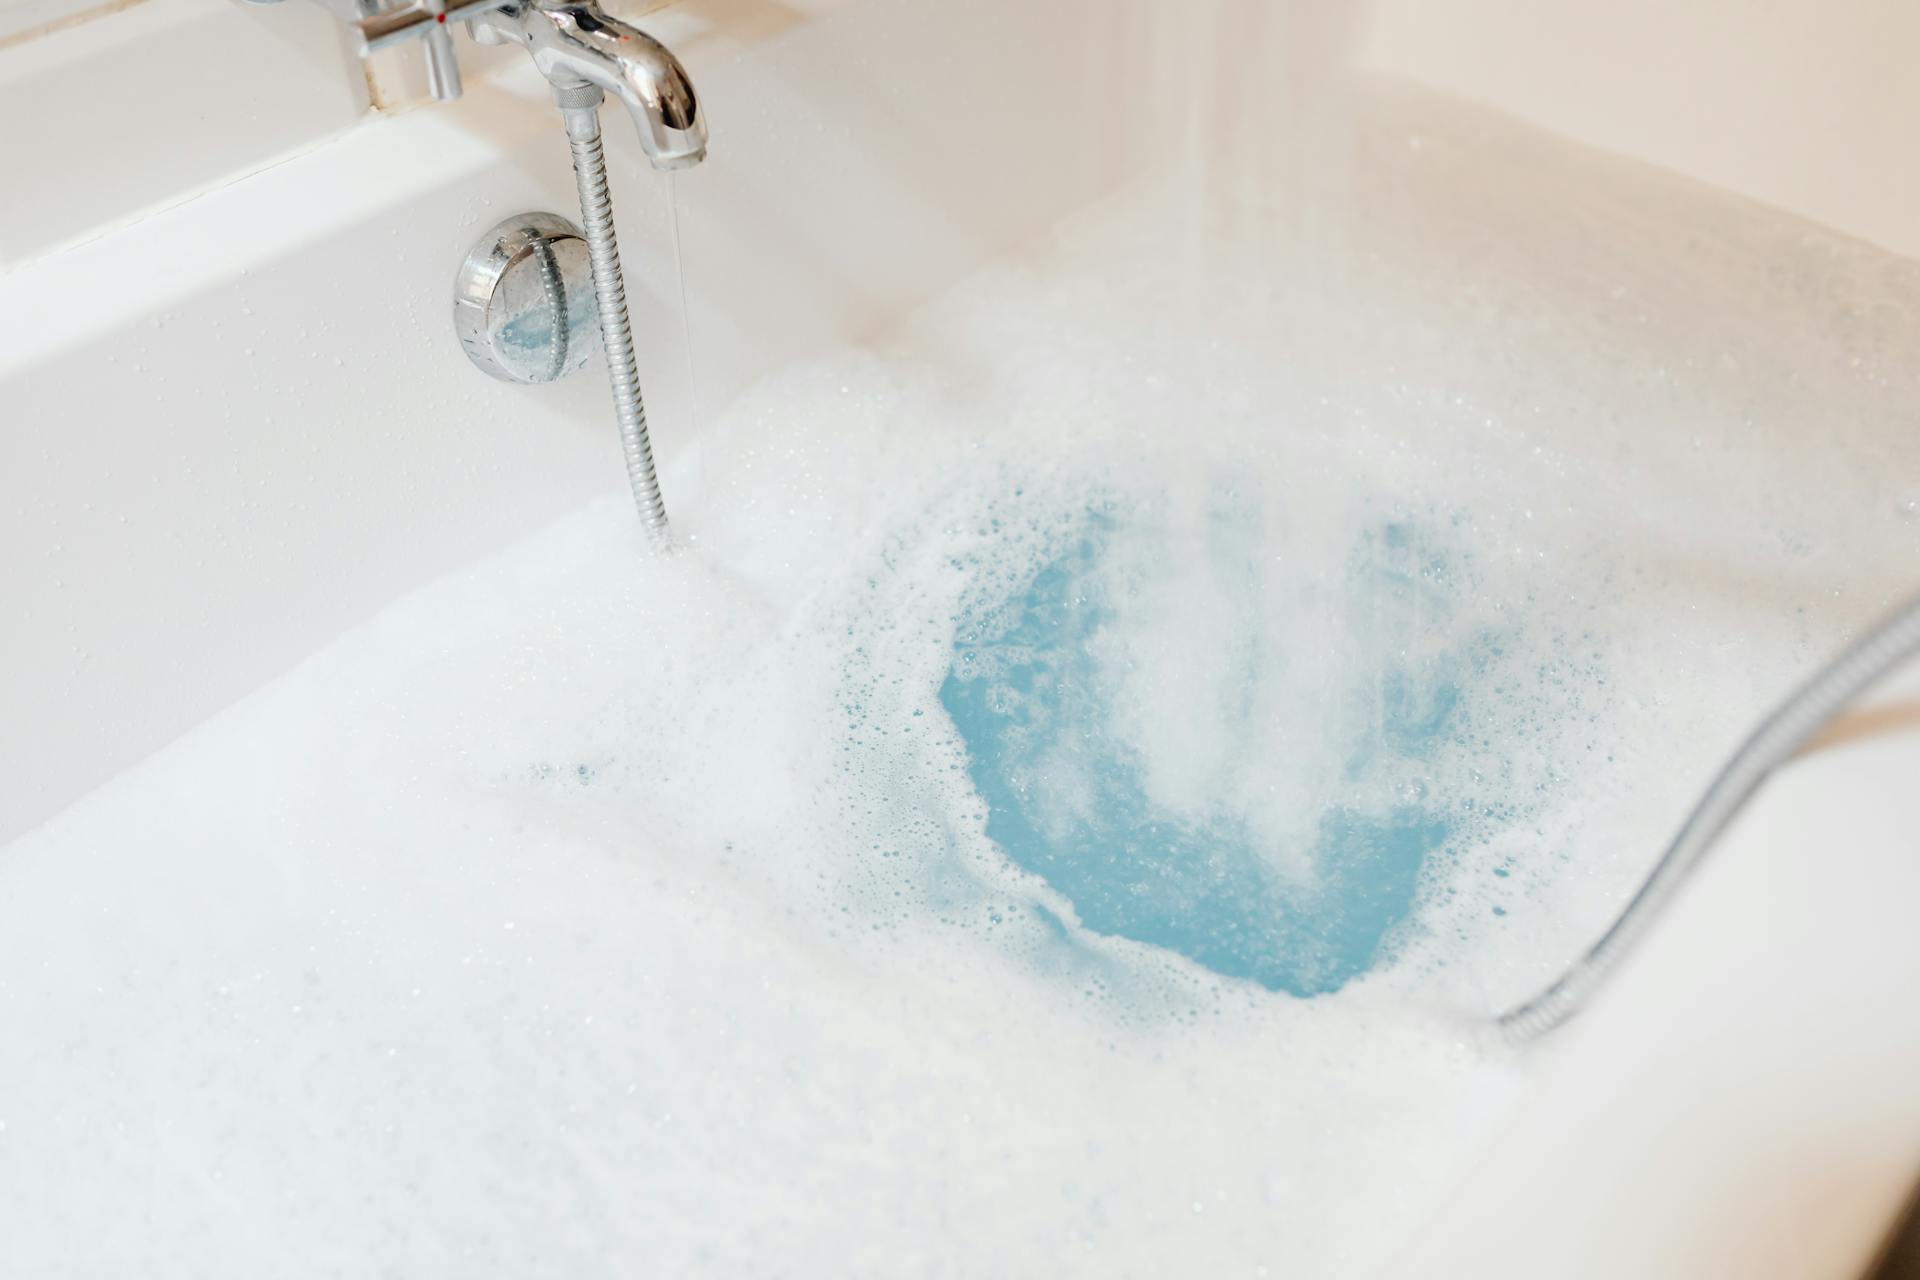 A bathtub filled with soapy water | Source: Pexels